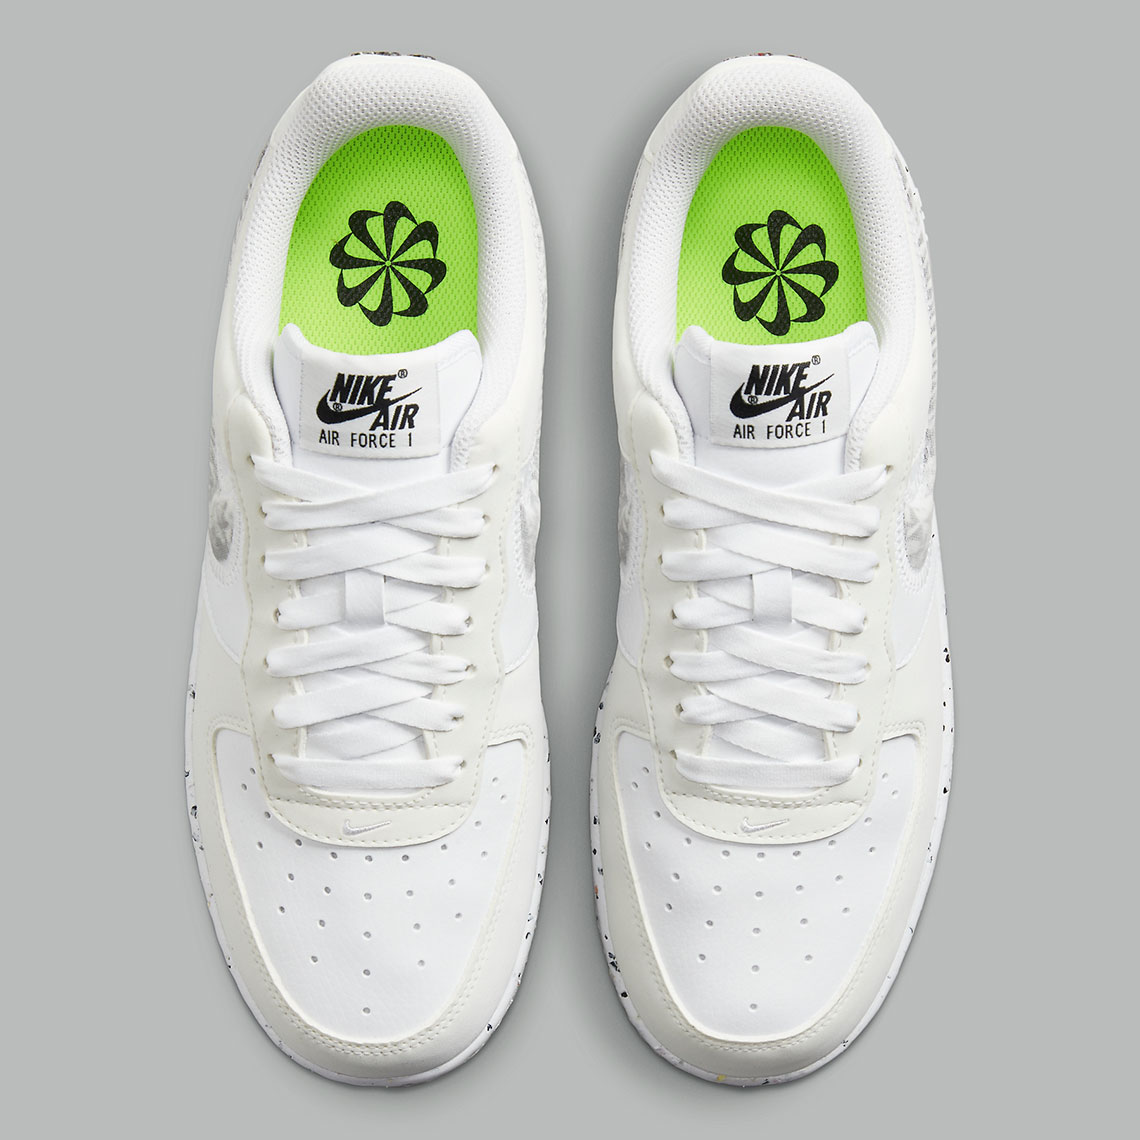 Nike Air Force 1 Low Crater White Sail Dh0927 101 2